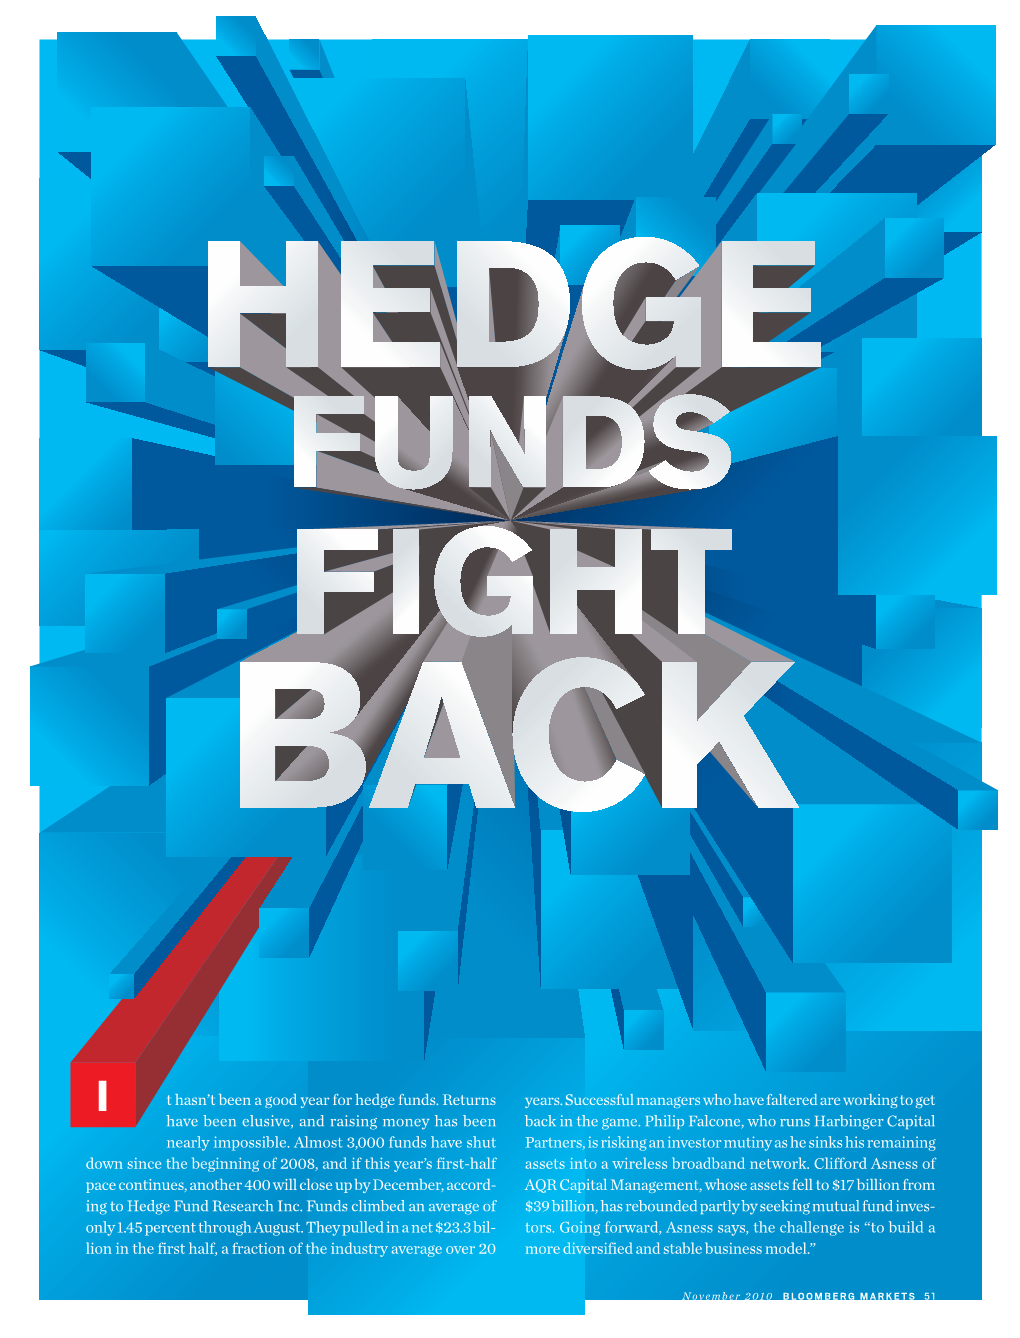 T Hasn't Been a Good Year for Hedge Funds. Returns Have Been Elusive